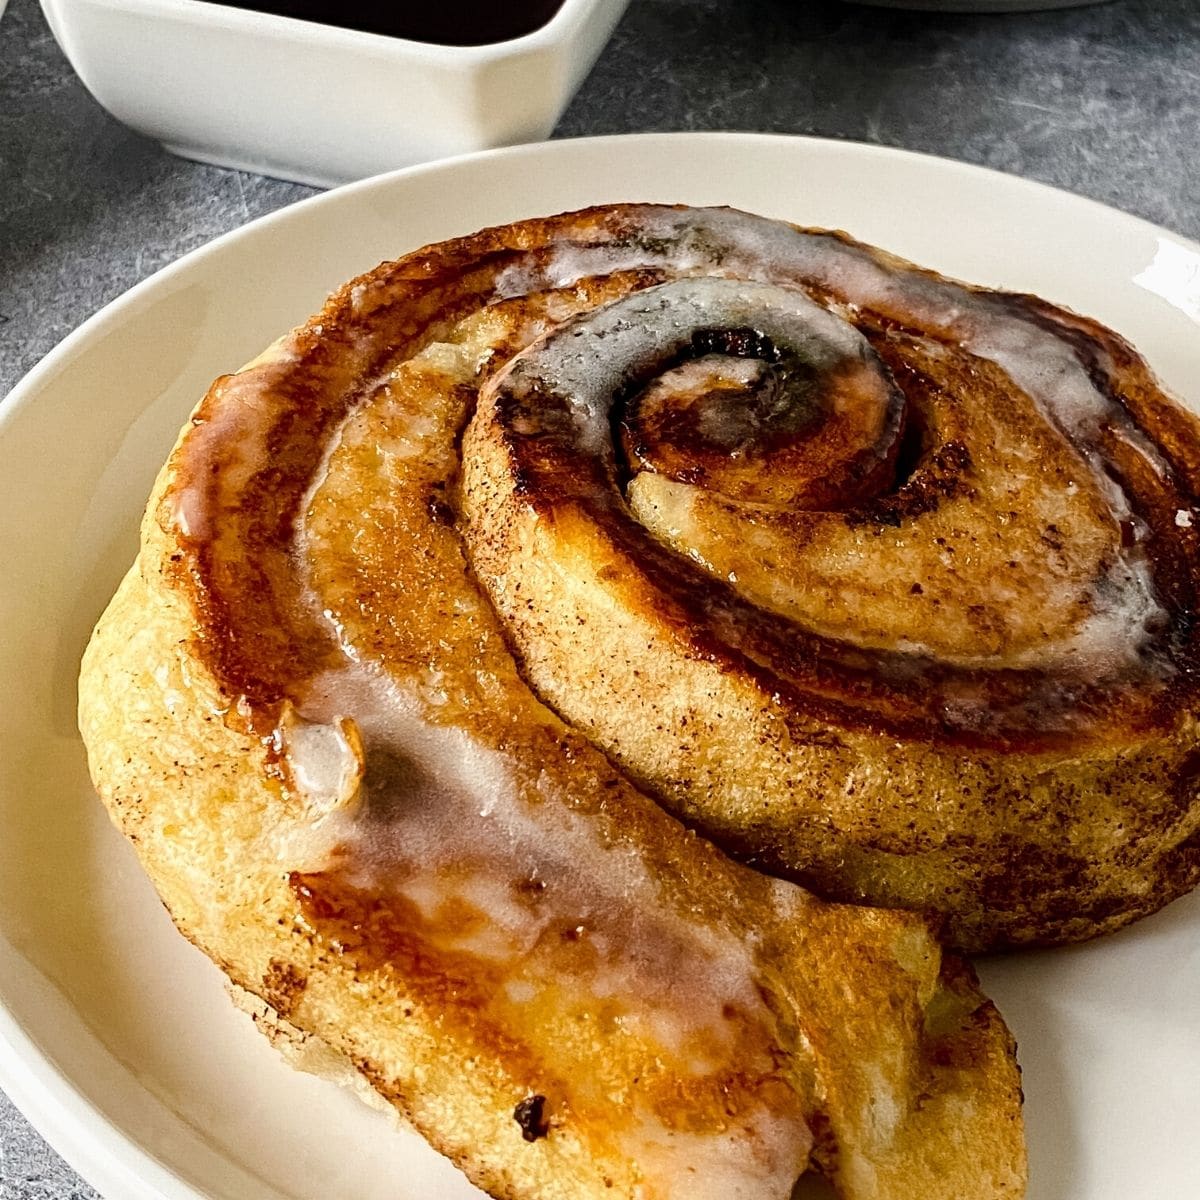 cinnamon roll pancake on white plate by bowl of syrup